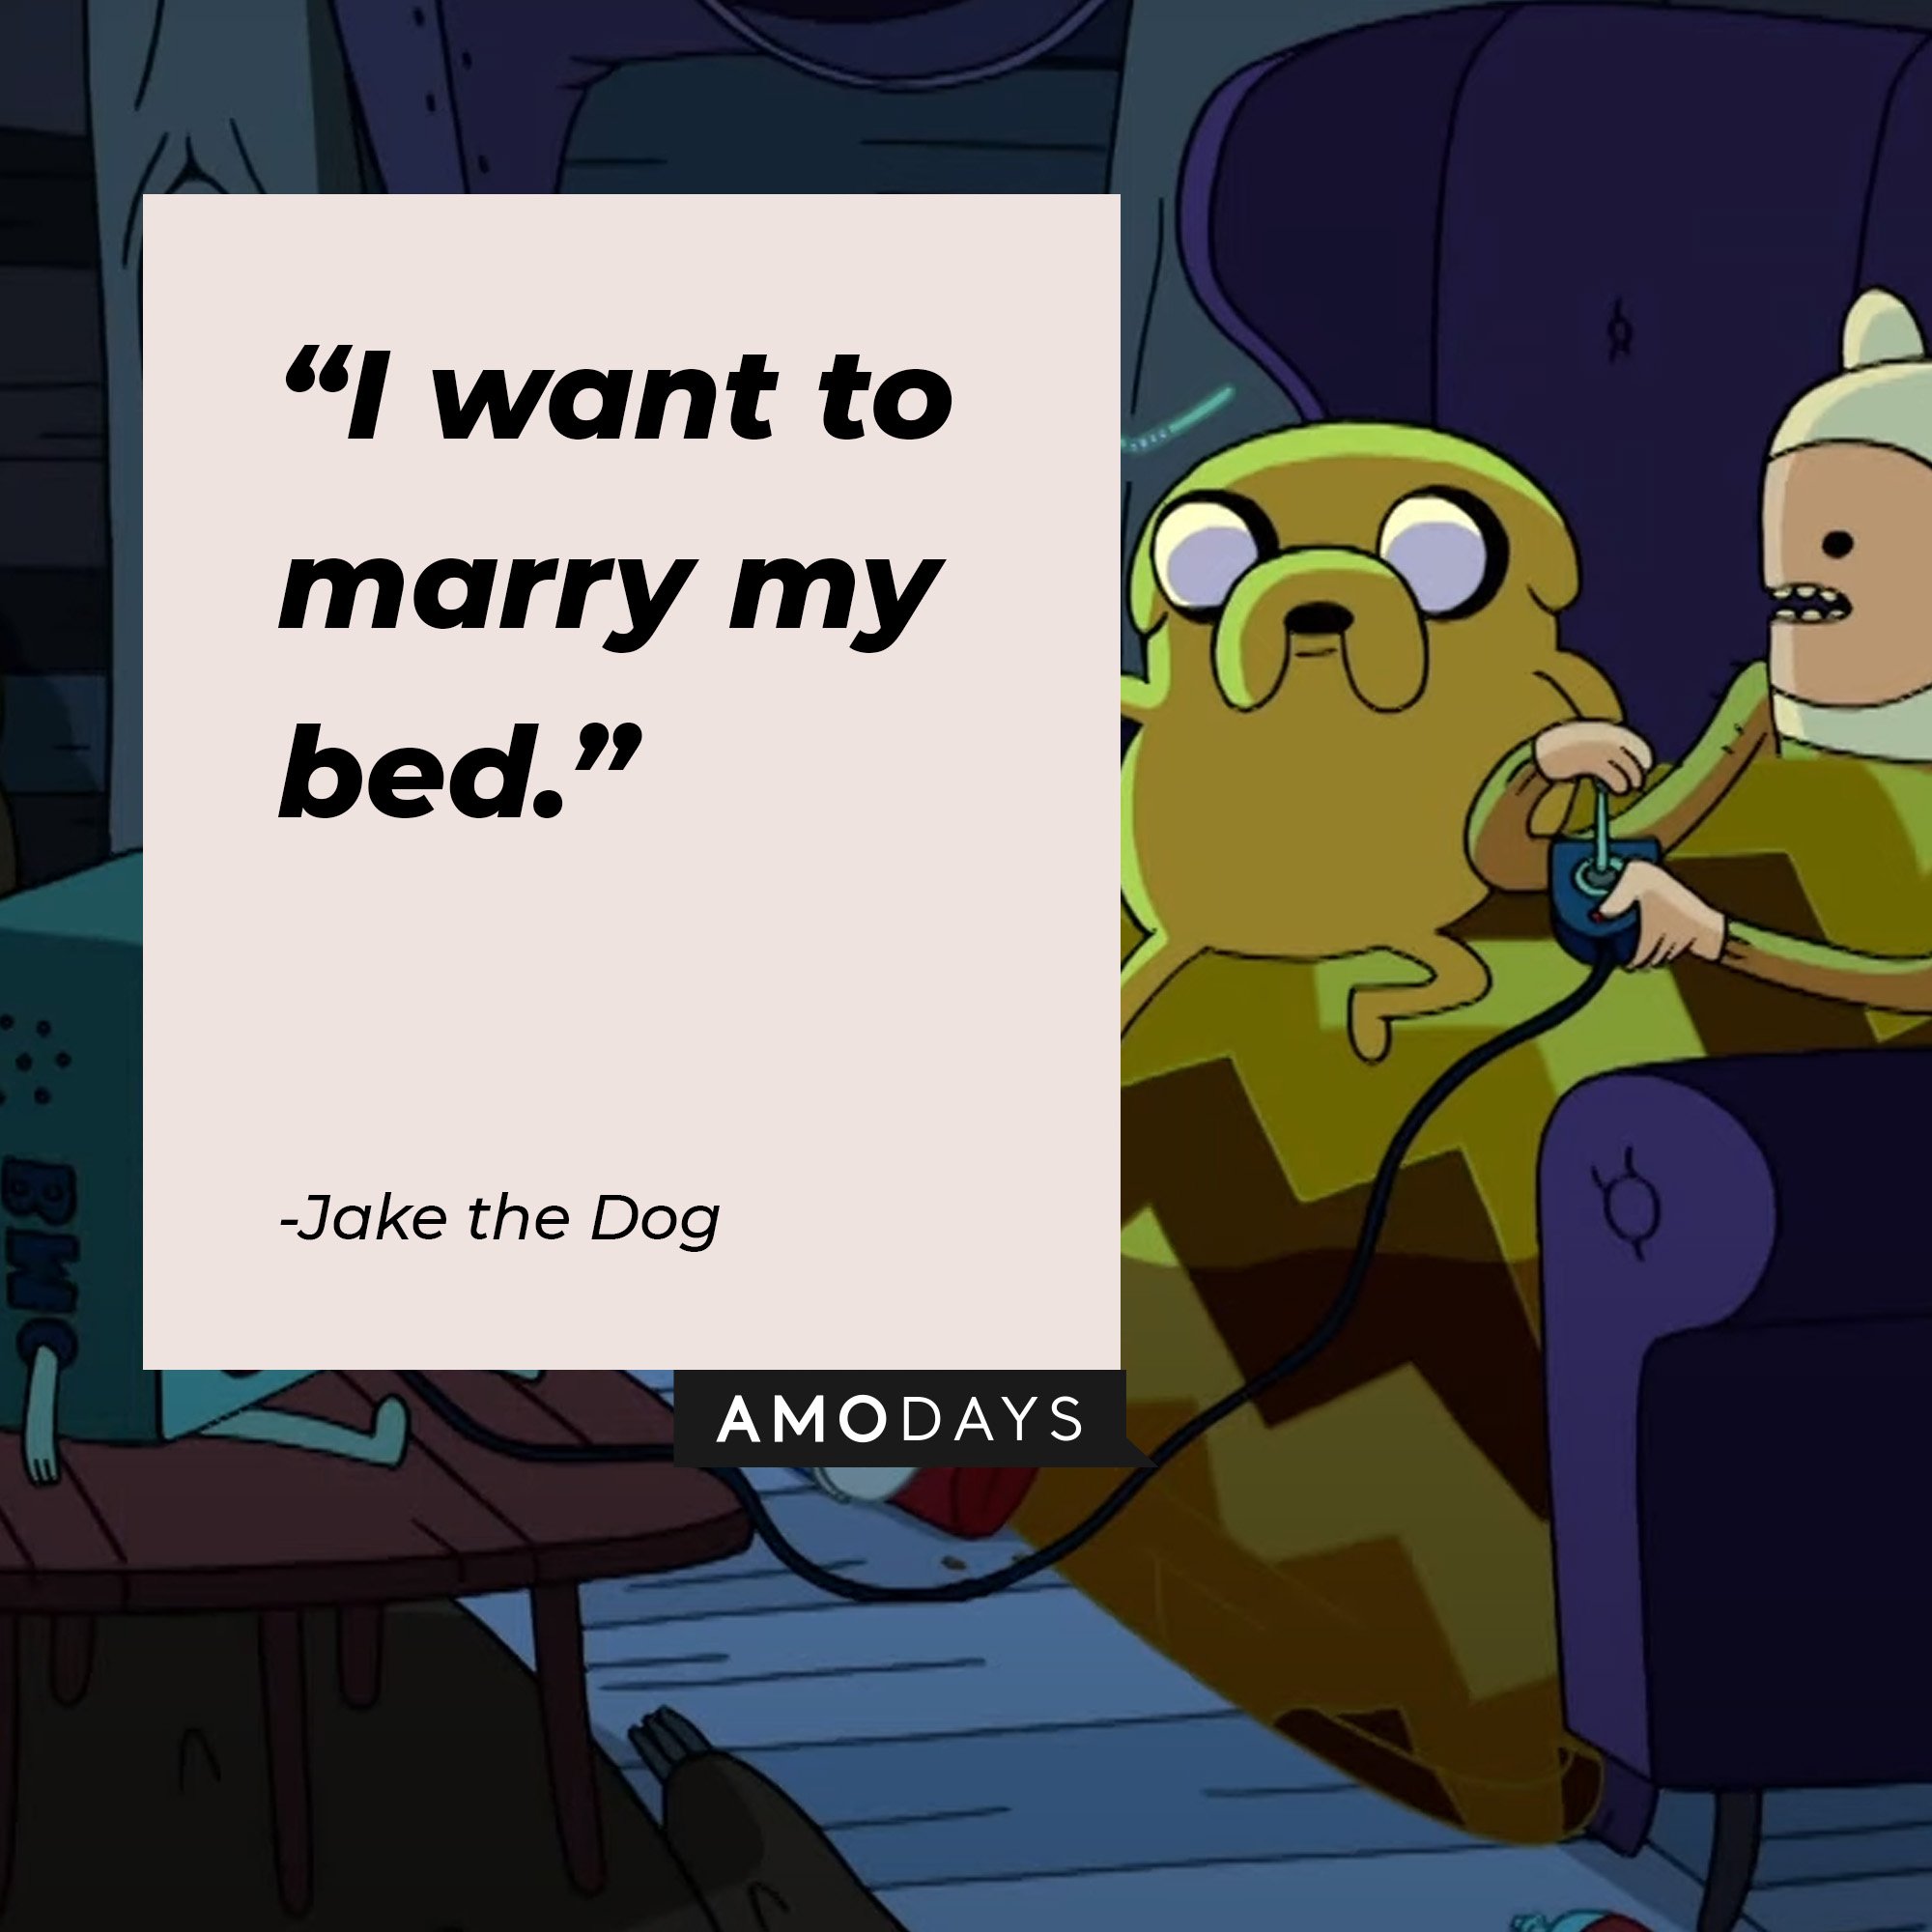 Jake the Dog’s quote: "I want to marry my bed." | Image: AmoDays